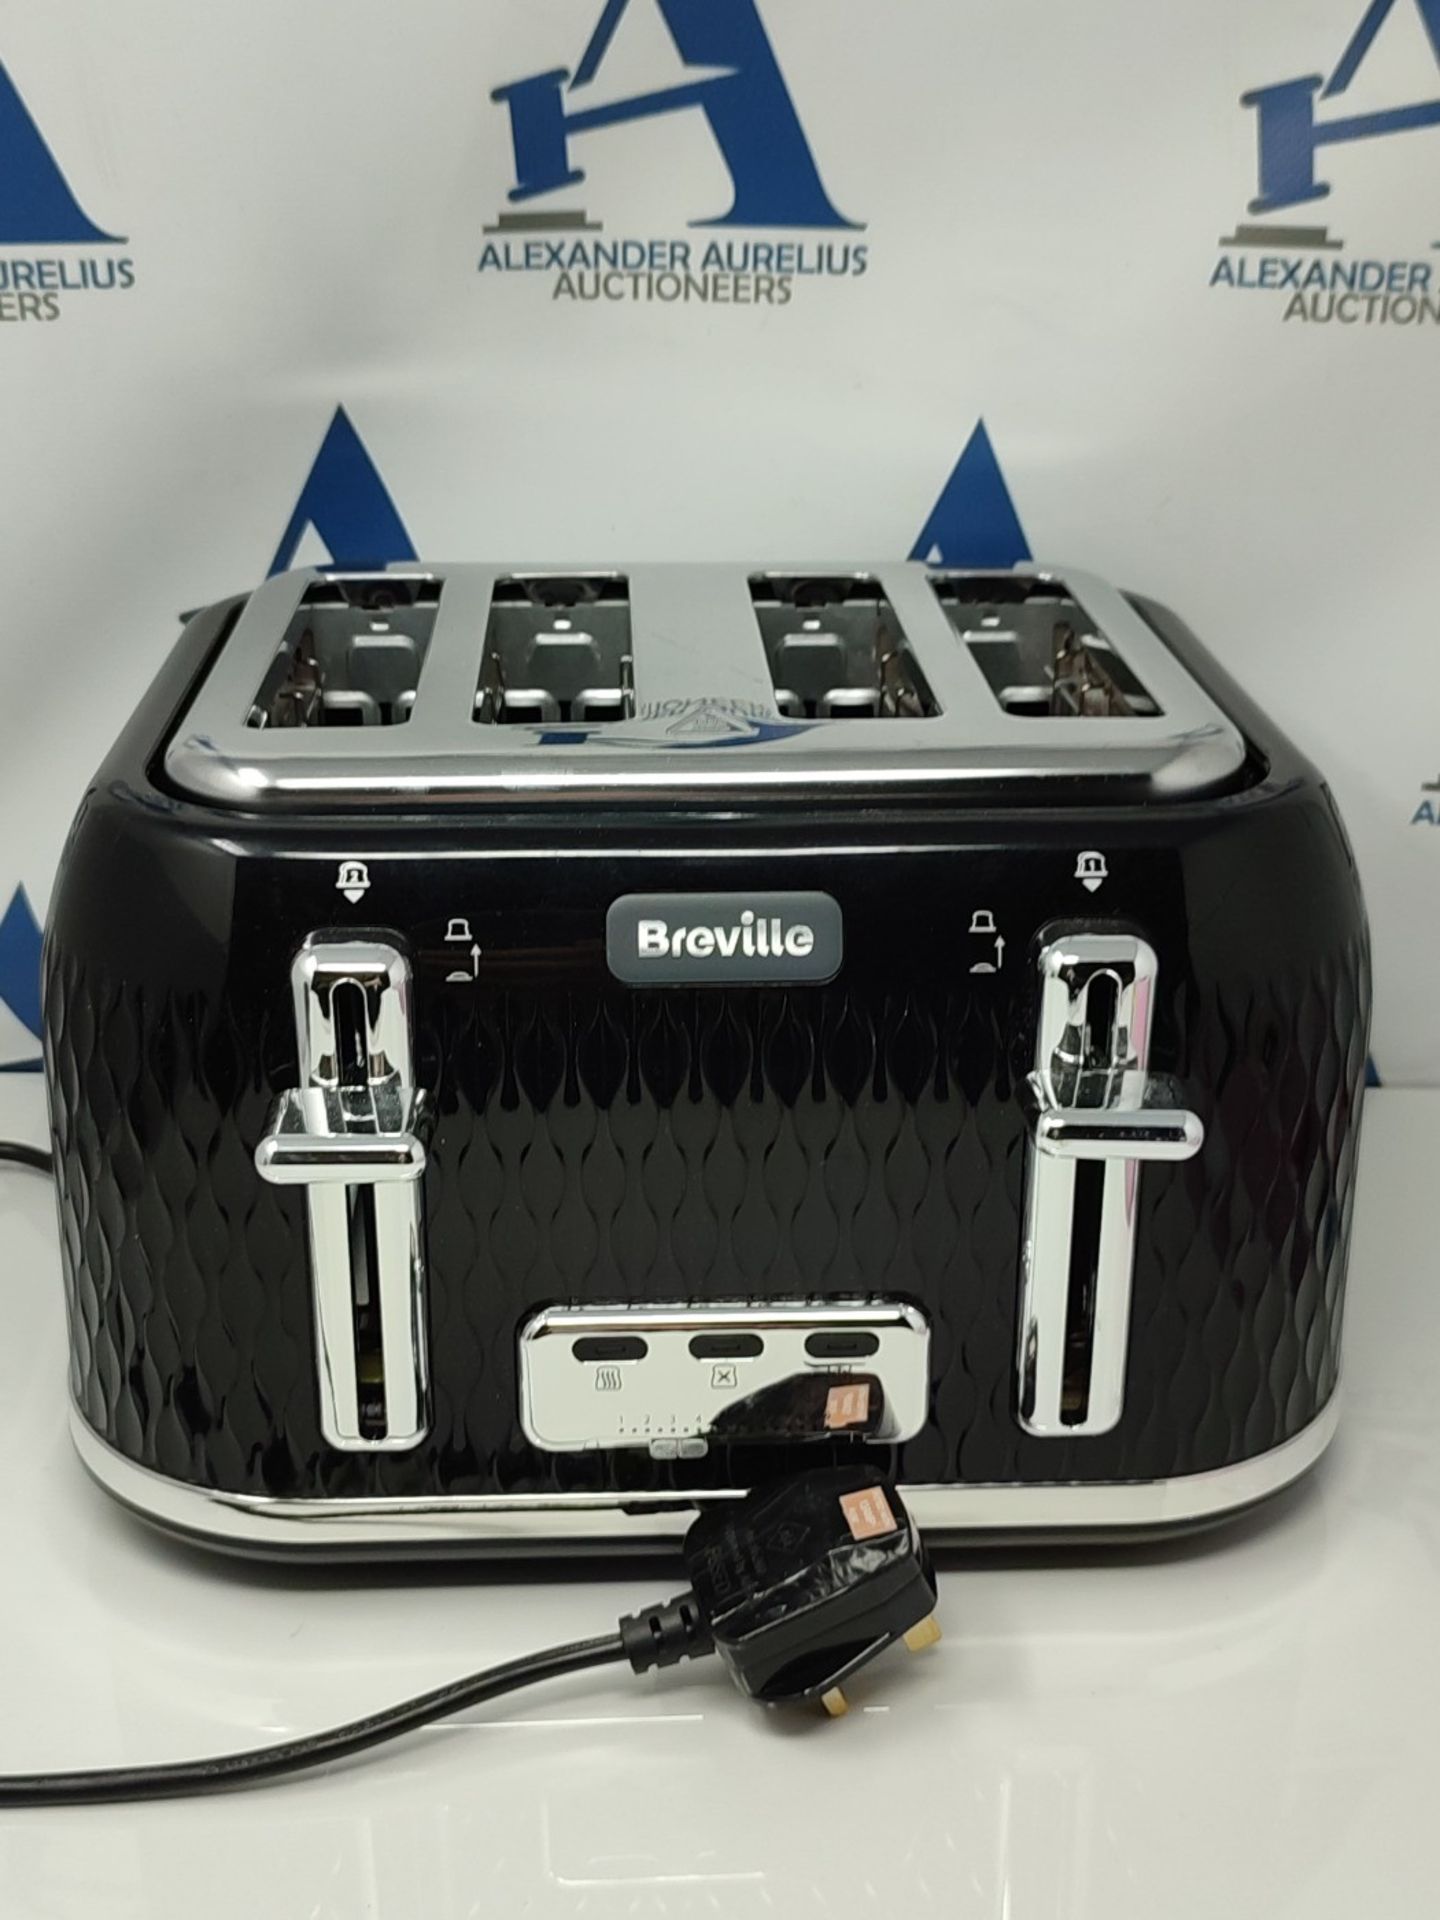 Breville Curve 4-Slice Toaster with High Lift and Wide Slots | Black & Chrome [VTT786] - Bild 2 aus 2